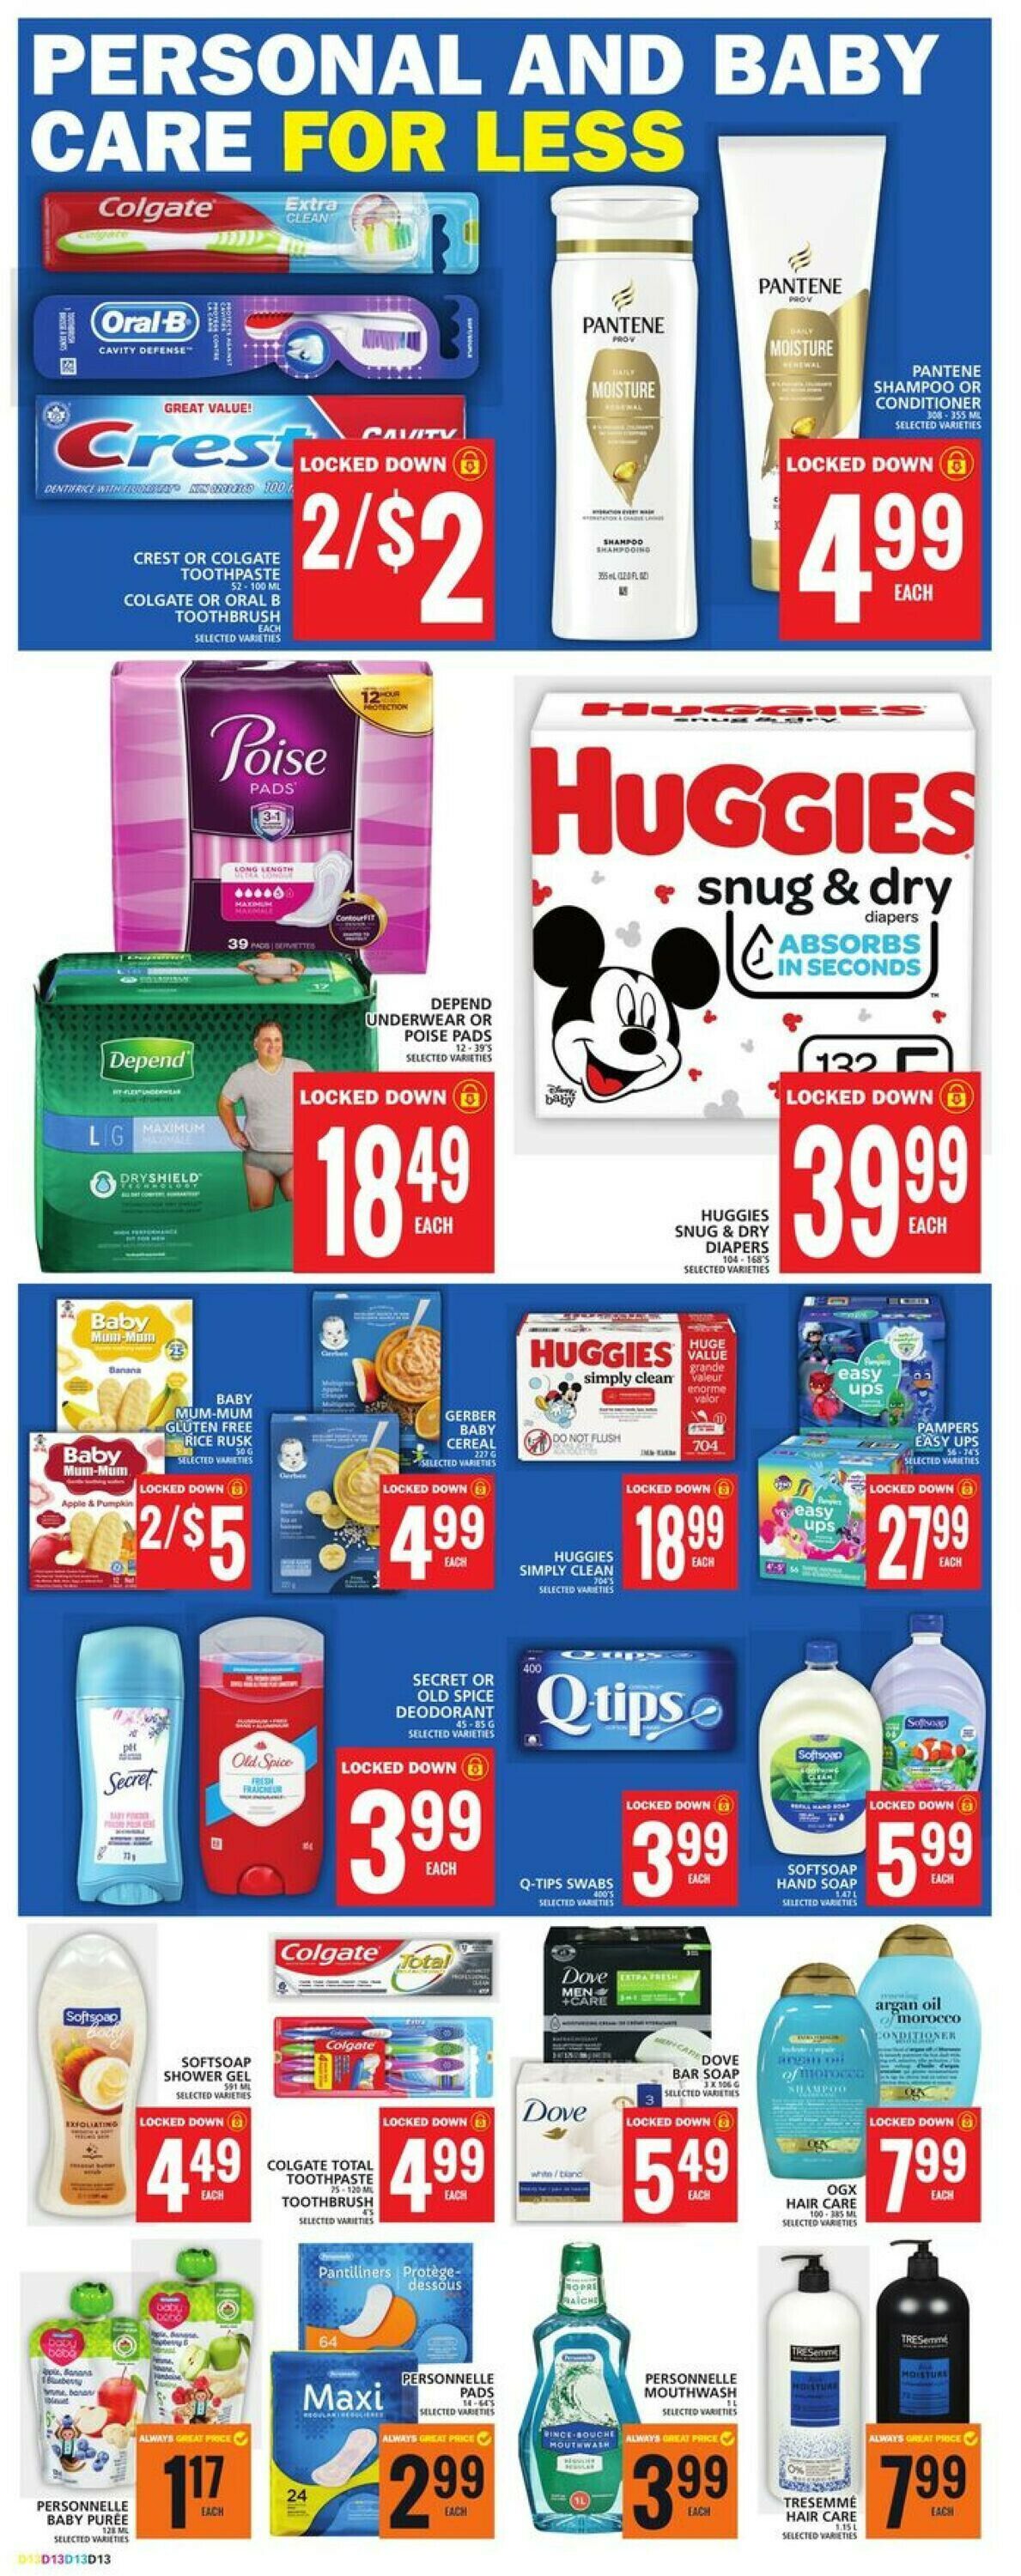 Food Basics Flyer from 08/31/2023